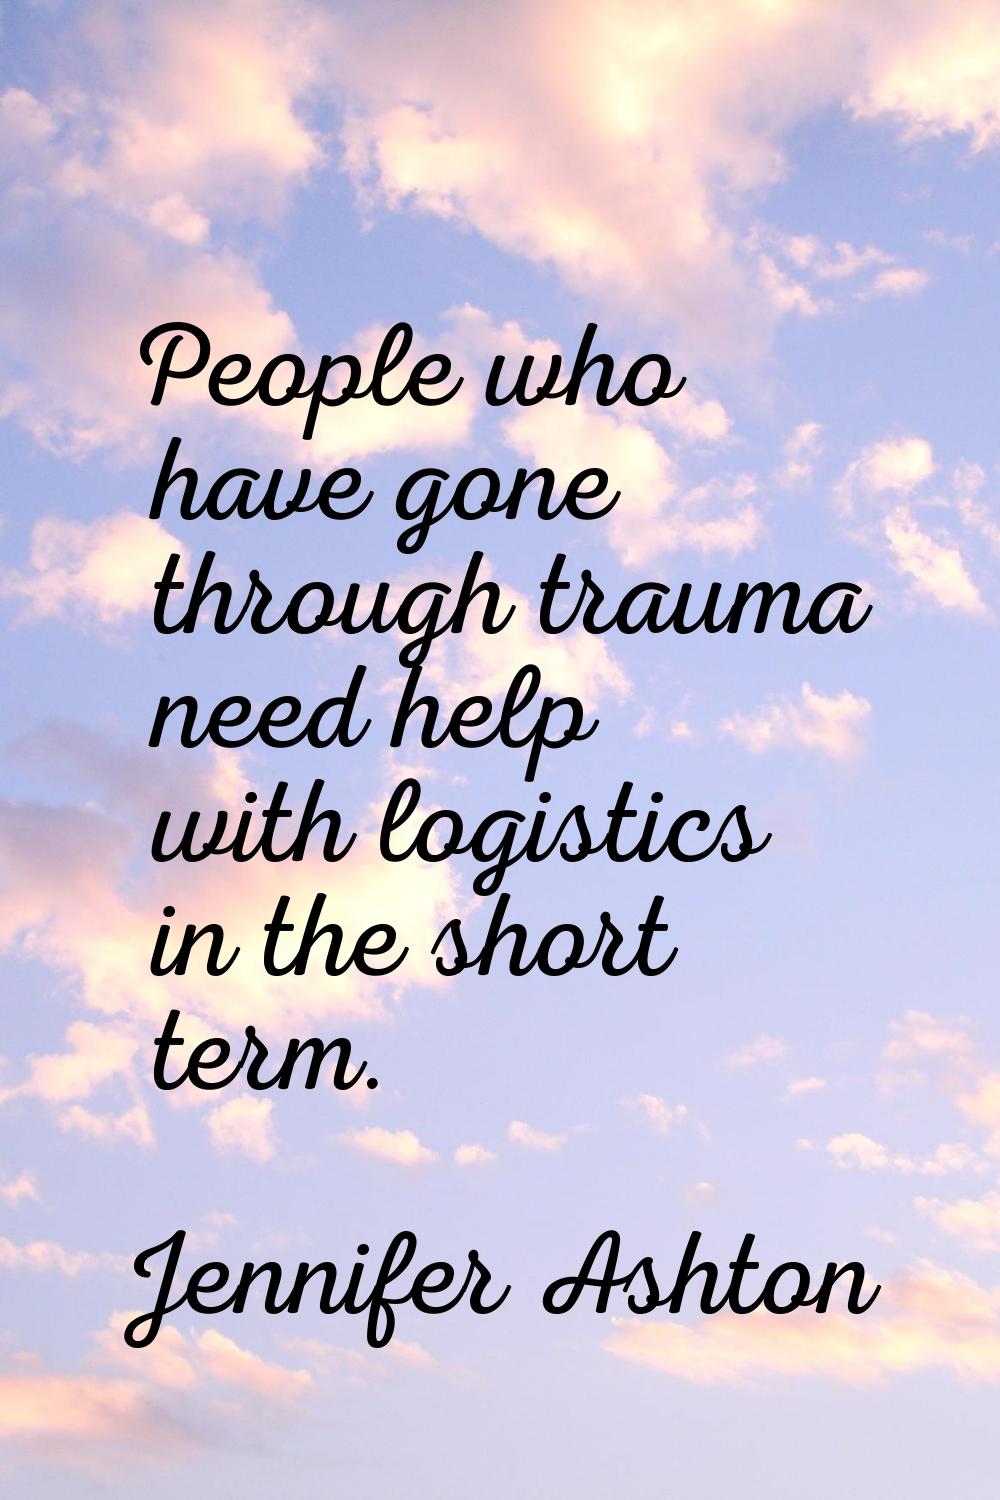 People who have gone through trauma need help with logistics in the short term.